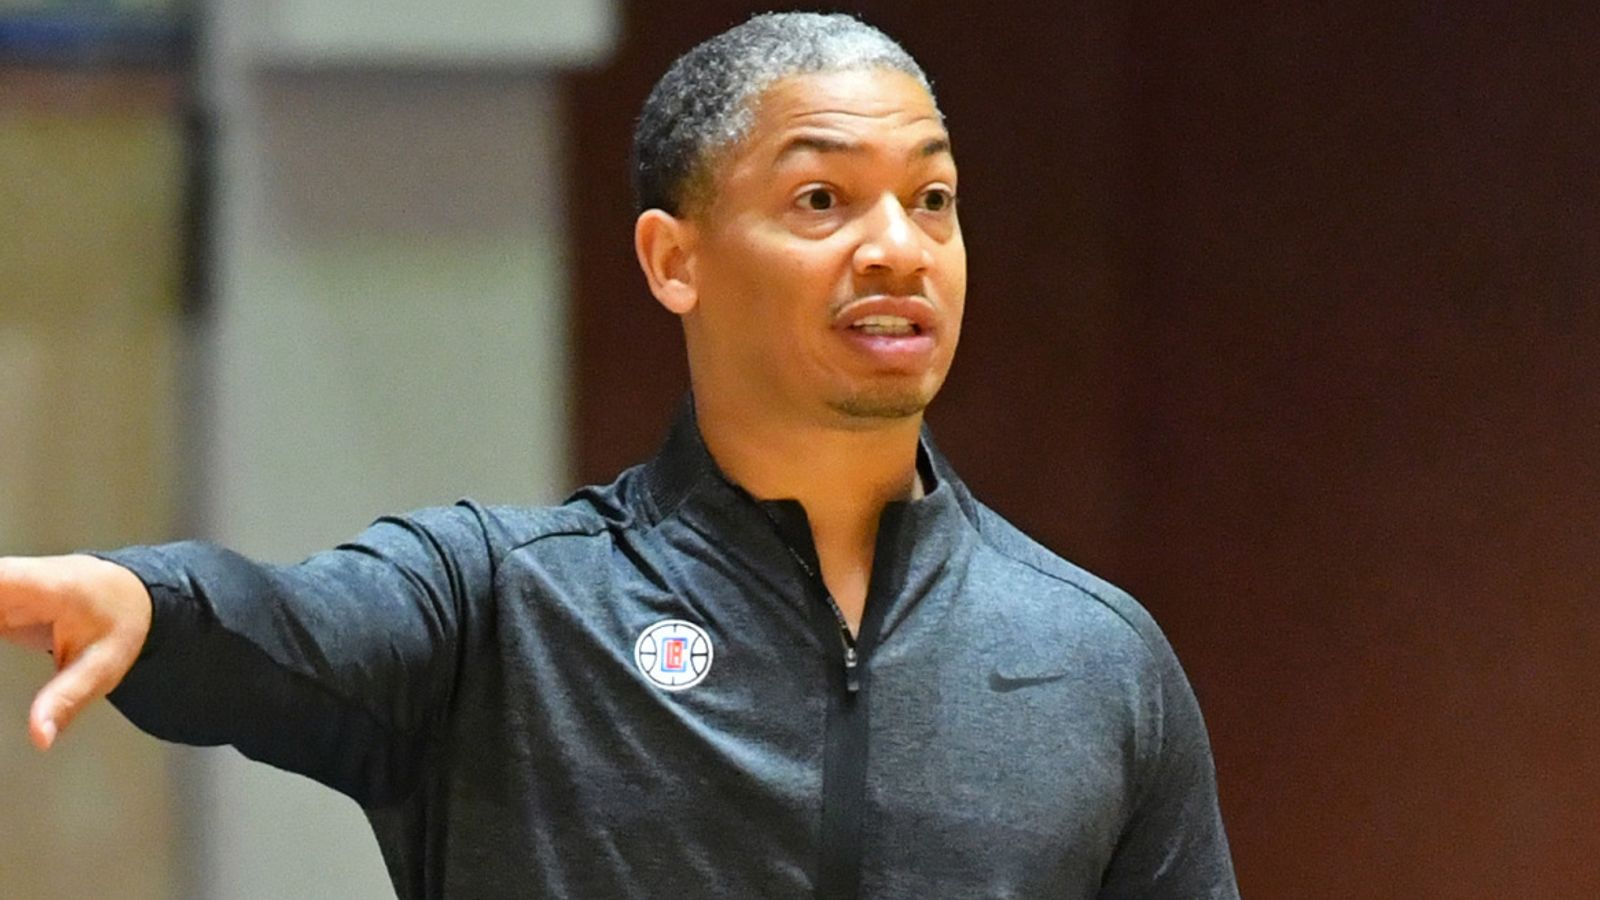 Tyronn Lue is said to be seeking security with Clippers - Los